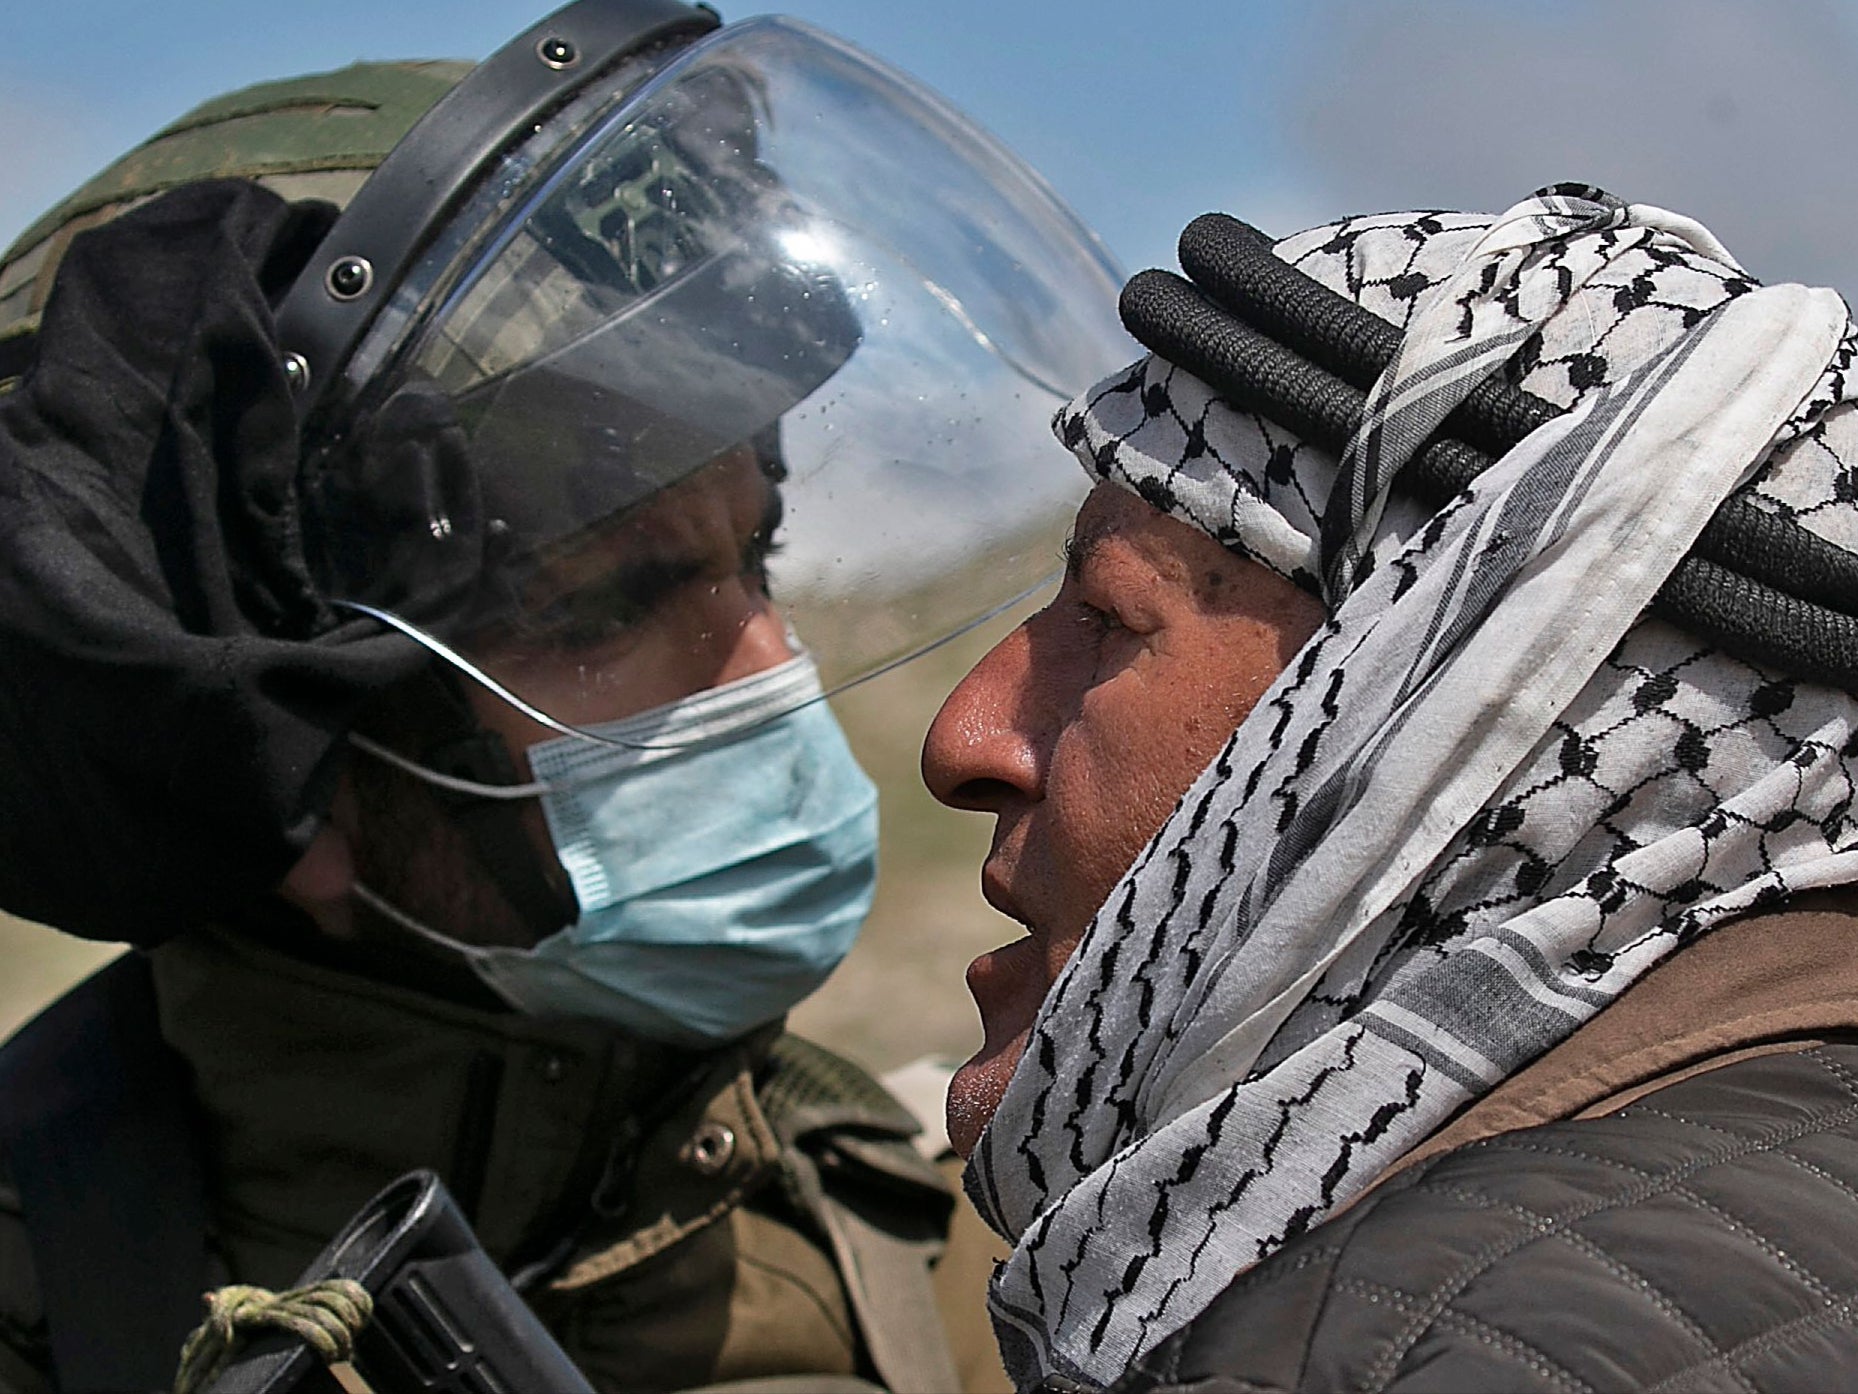 A Palestinian man and an Israeli soldier during a confrontation at a protest against the establishment of Israeli outposts in Palestinian lands at Beit Dajan, in the occupied West Bank, on 26 March